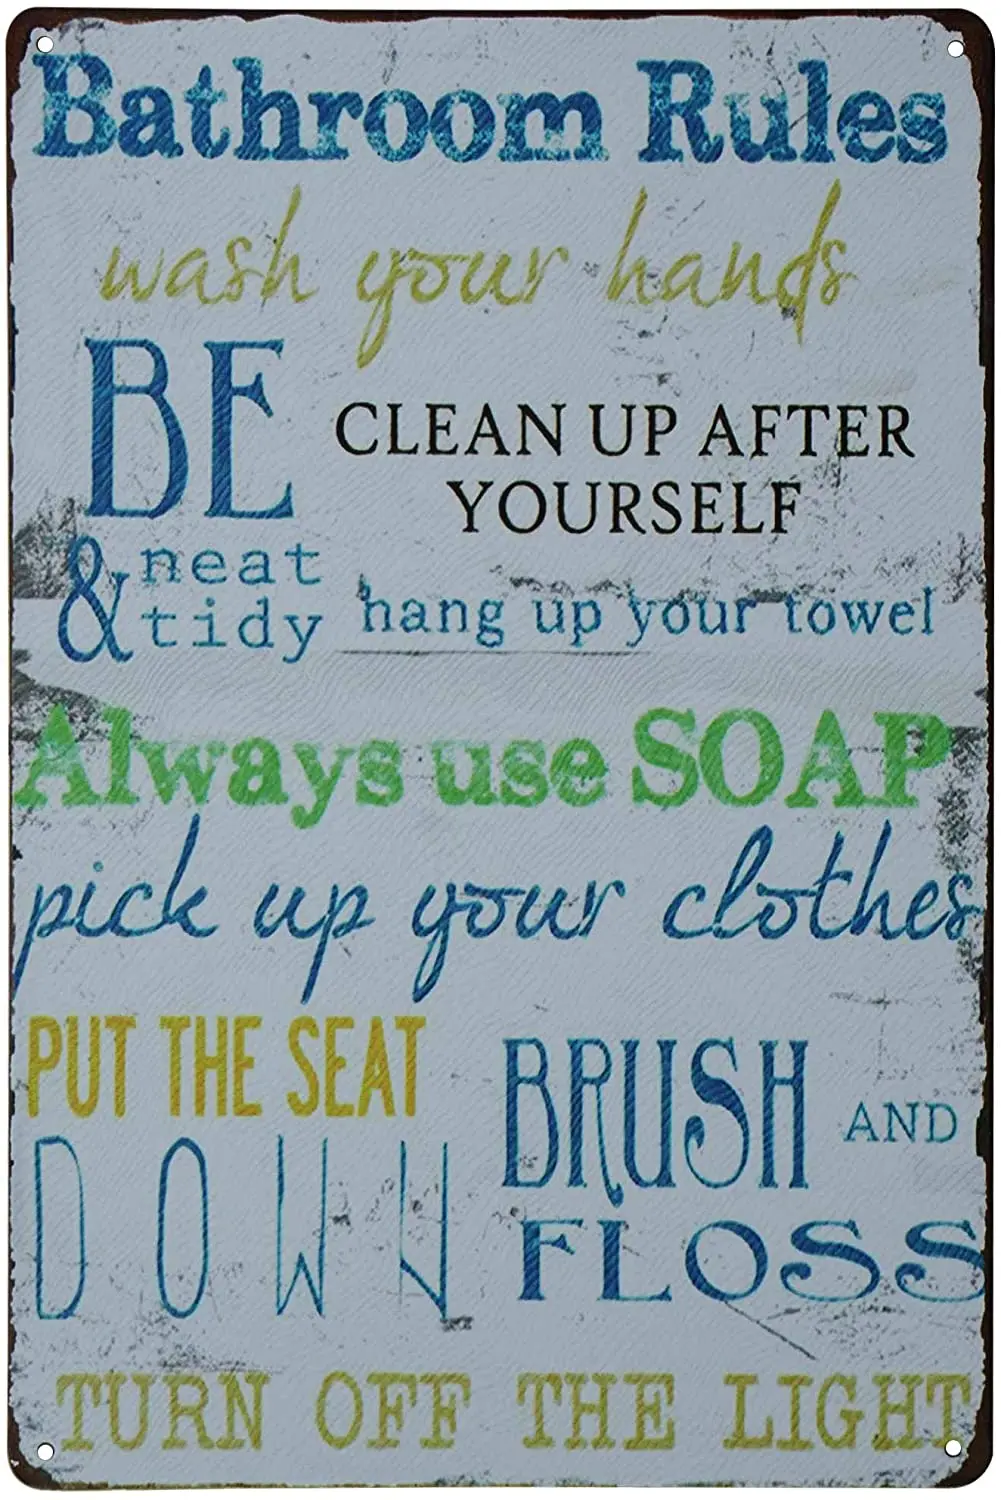 

Laundry Rules Typography Vintage Distressed Metal Tin Signs Rustic Laundry Room Bathroom Wall Plaque 8X12 or 12x16 Inches